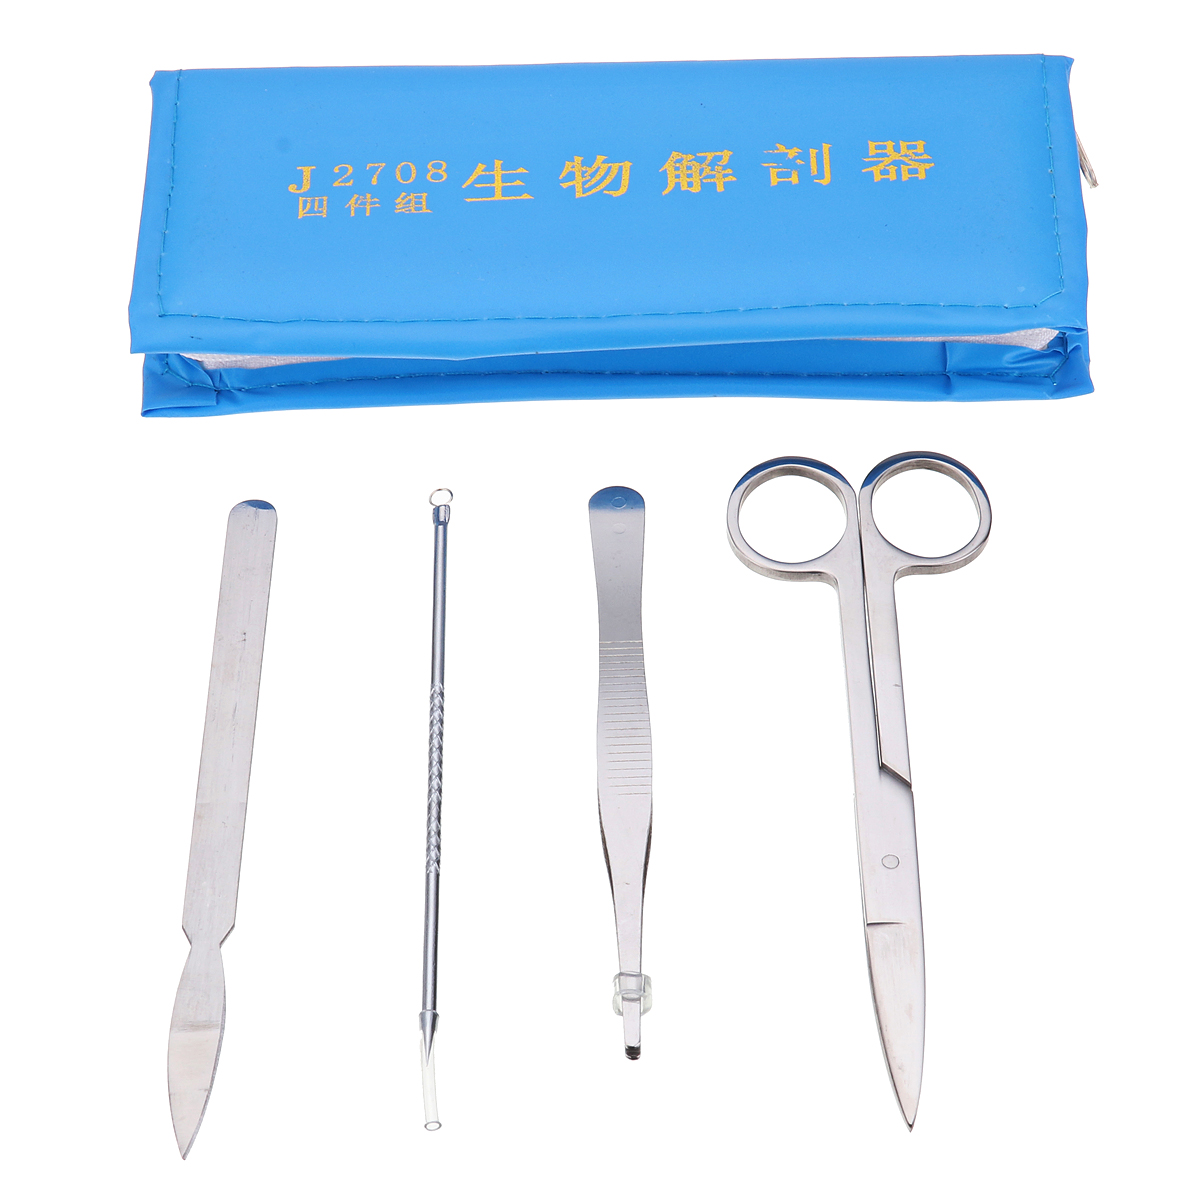 

4Pcs/Set Biological Dissecting Dissection Experiment Anatomy Scalpel Tools Kit Scalpel Blade Medical Student Teaching